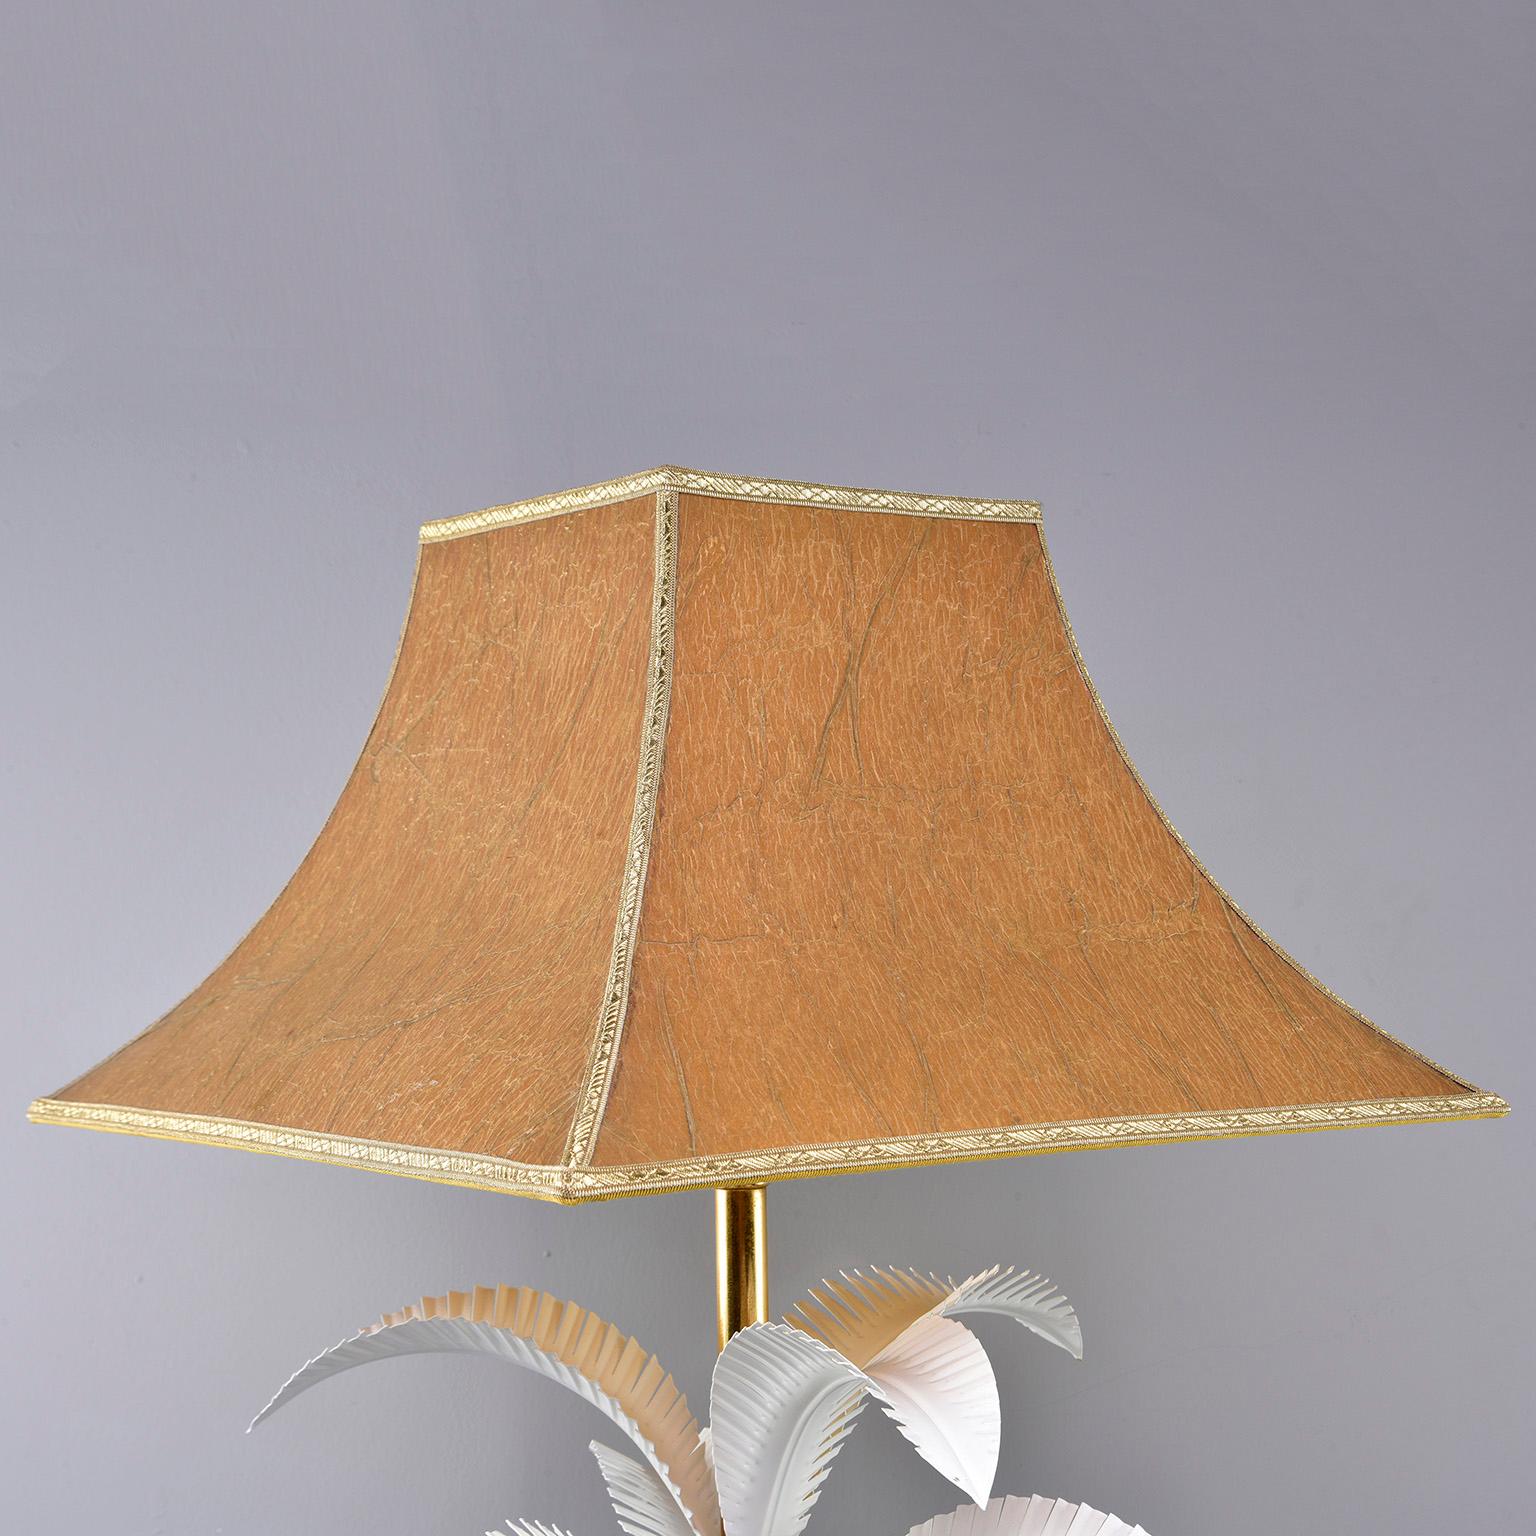 European Hollywood Regency Brass Lamp with Parchment Shade